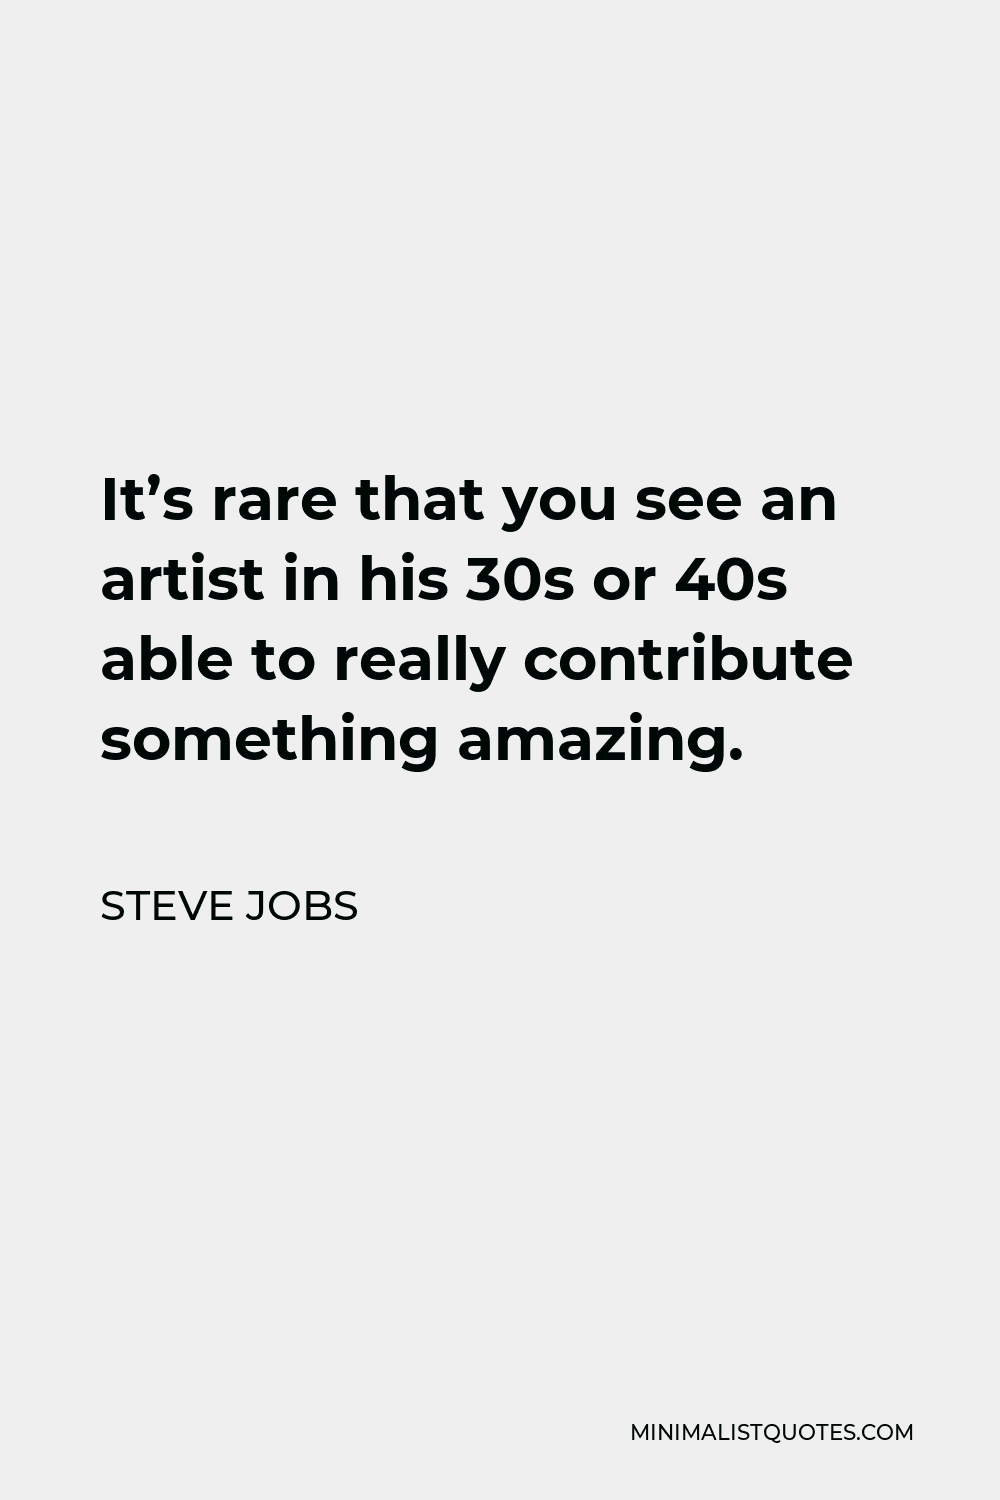 Steve Jobs Quote - It’s rare that you see an artist in his 30s or 40s able to really contribute something amazing.